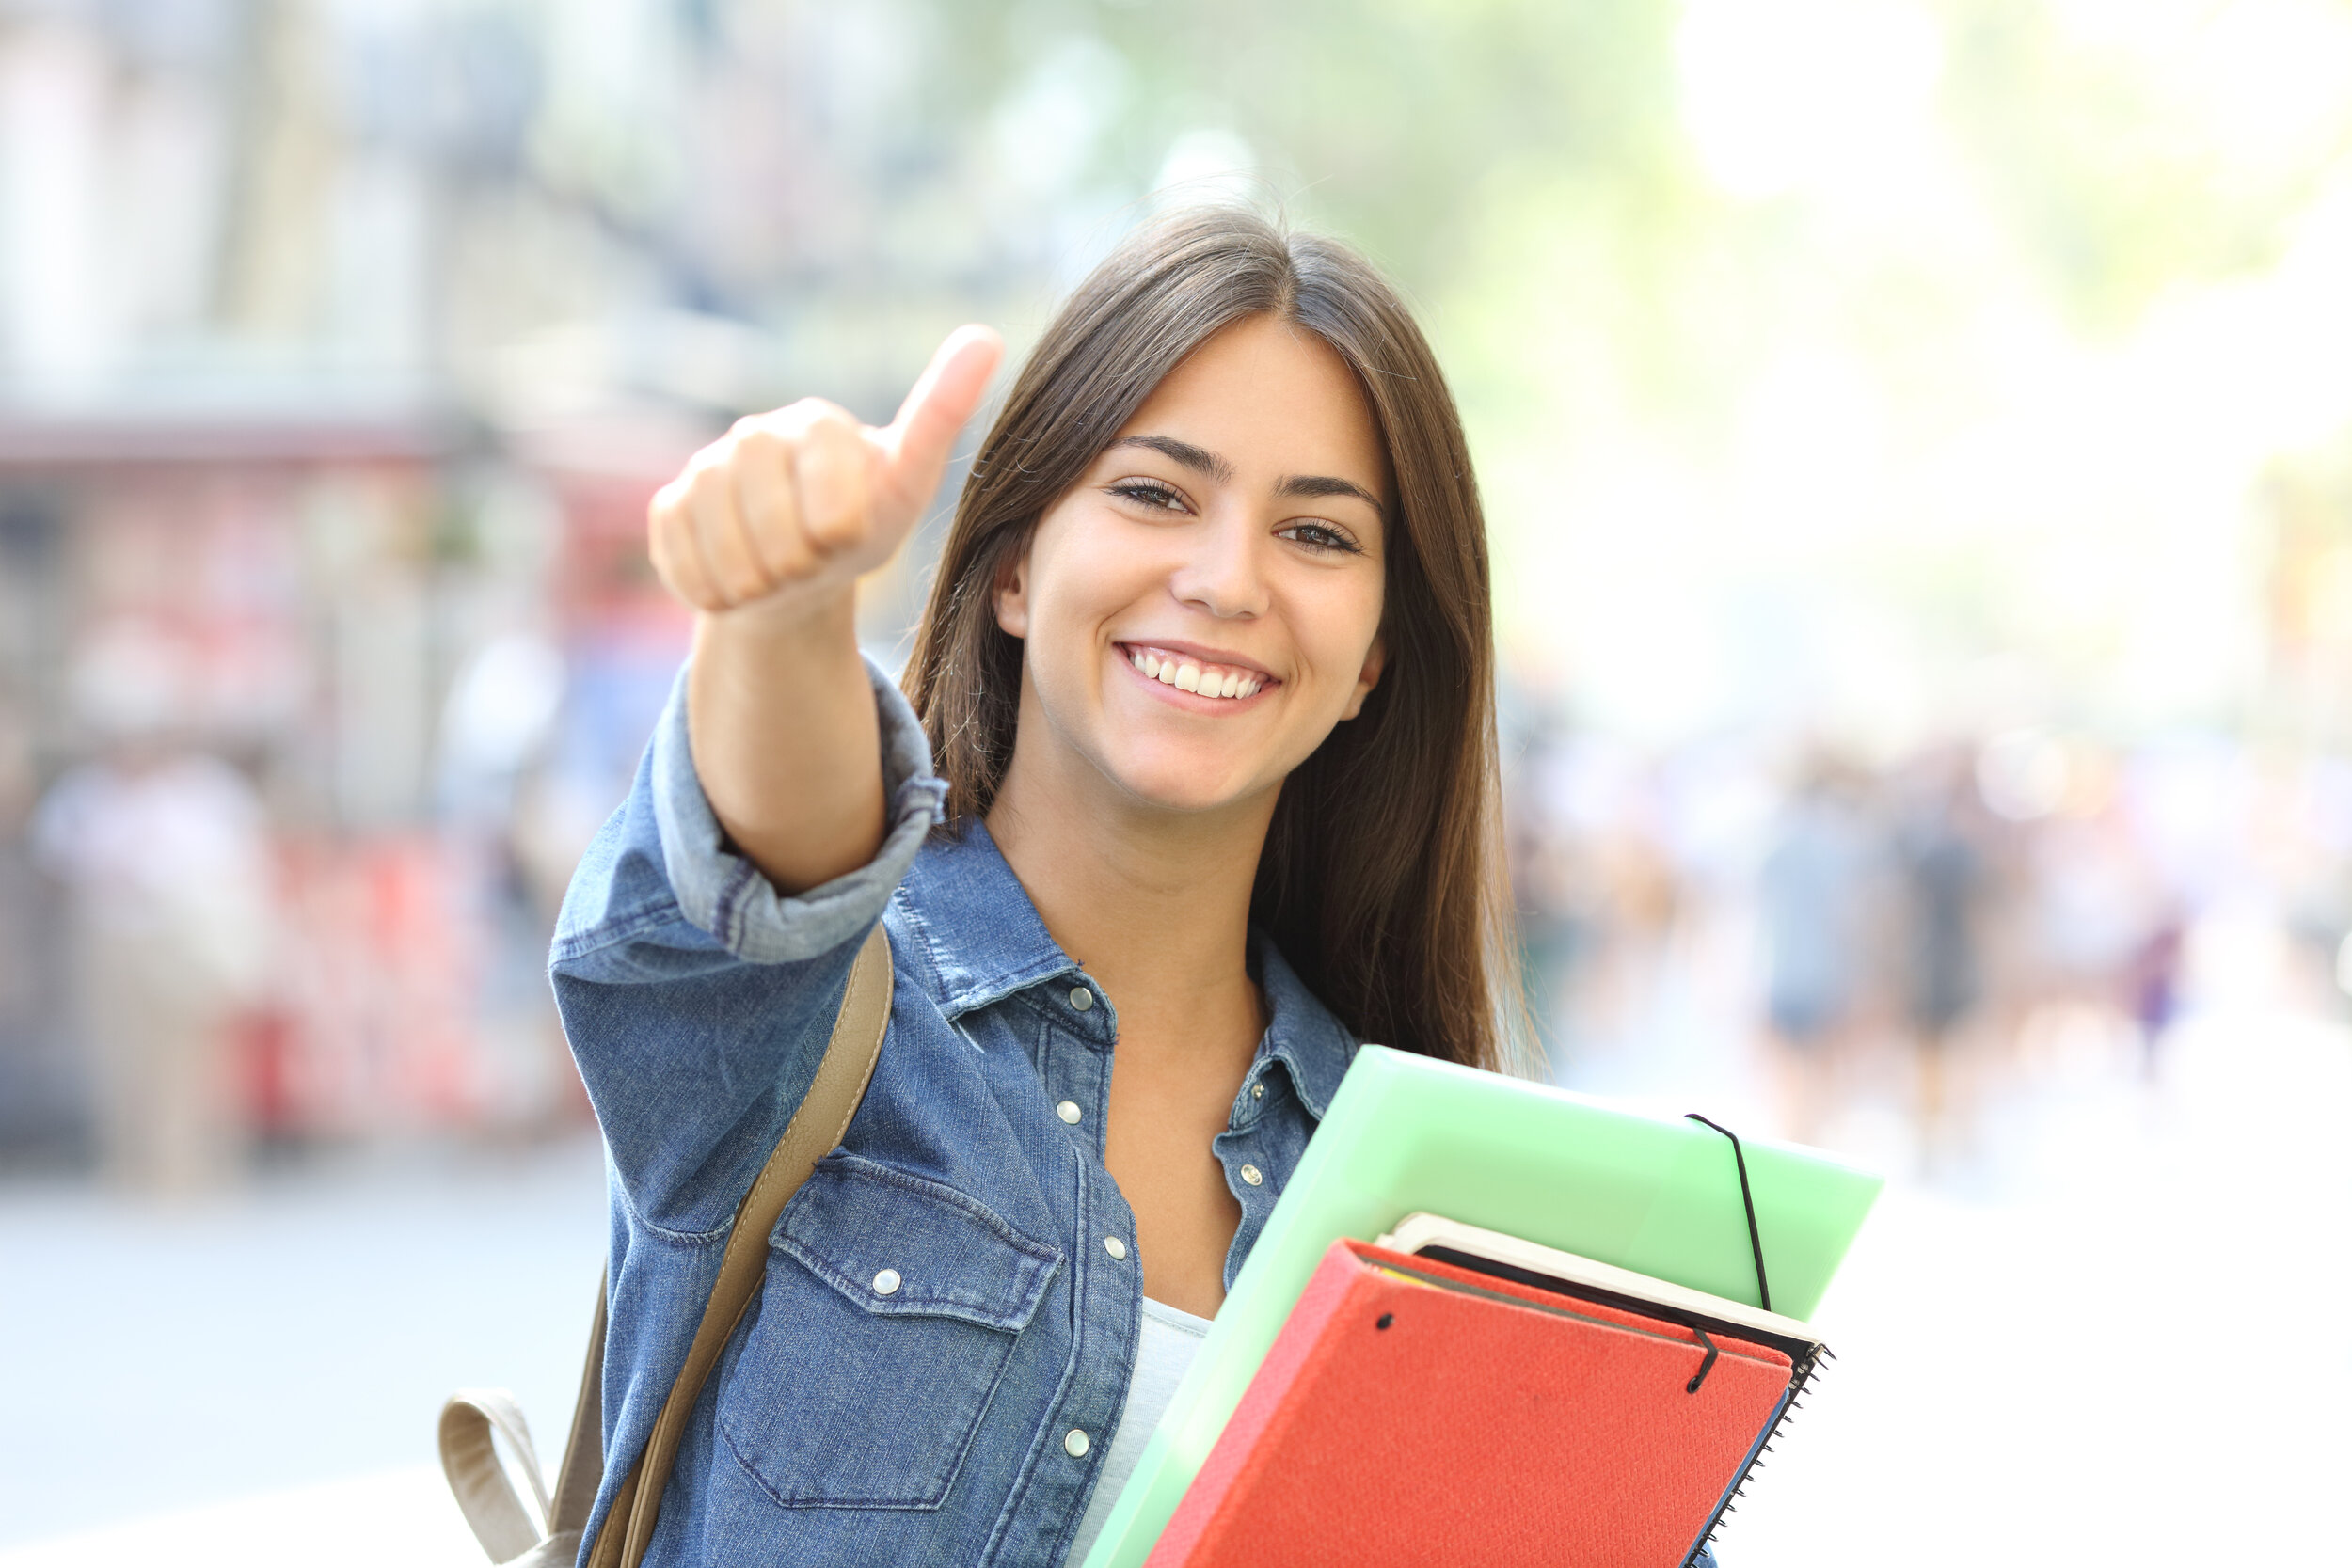 Teen holding schoolbooks and giving thumbs up sign